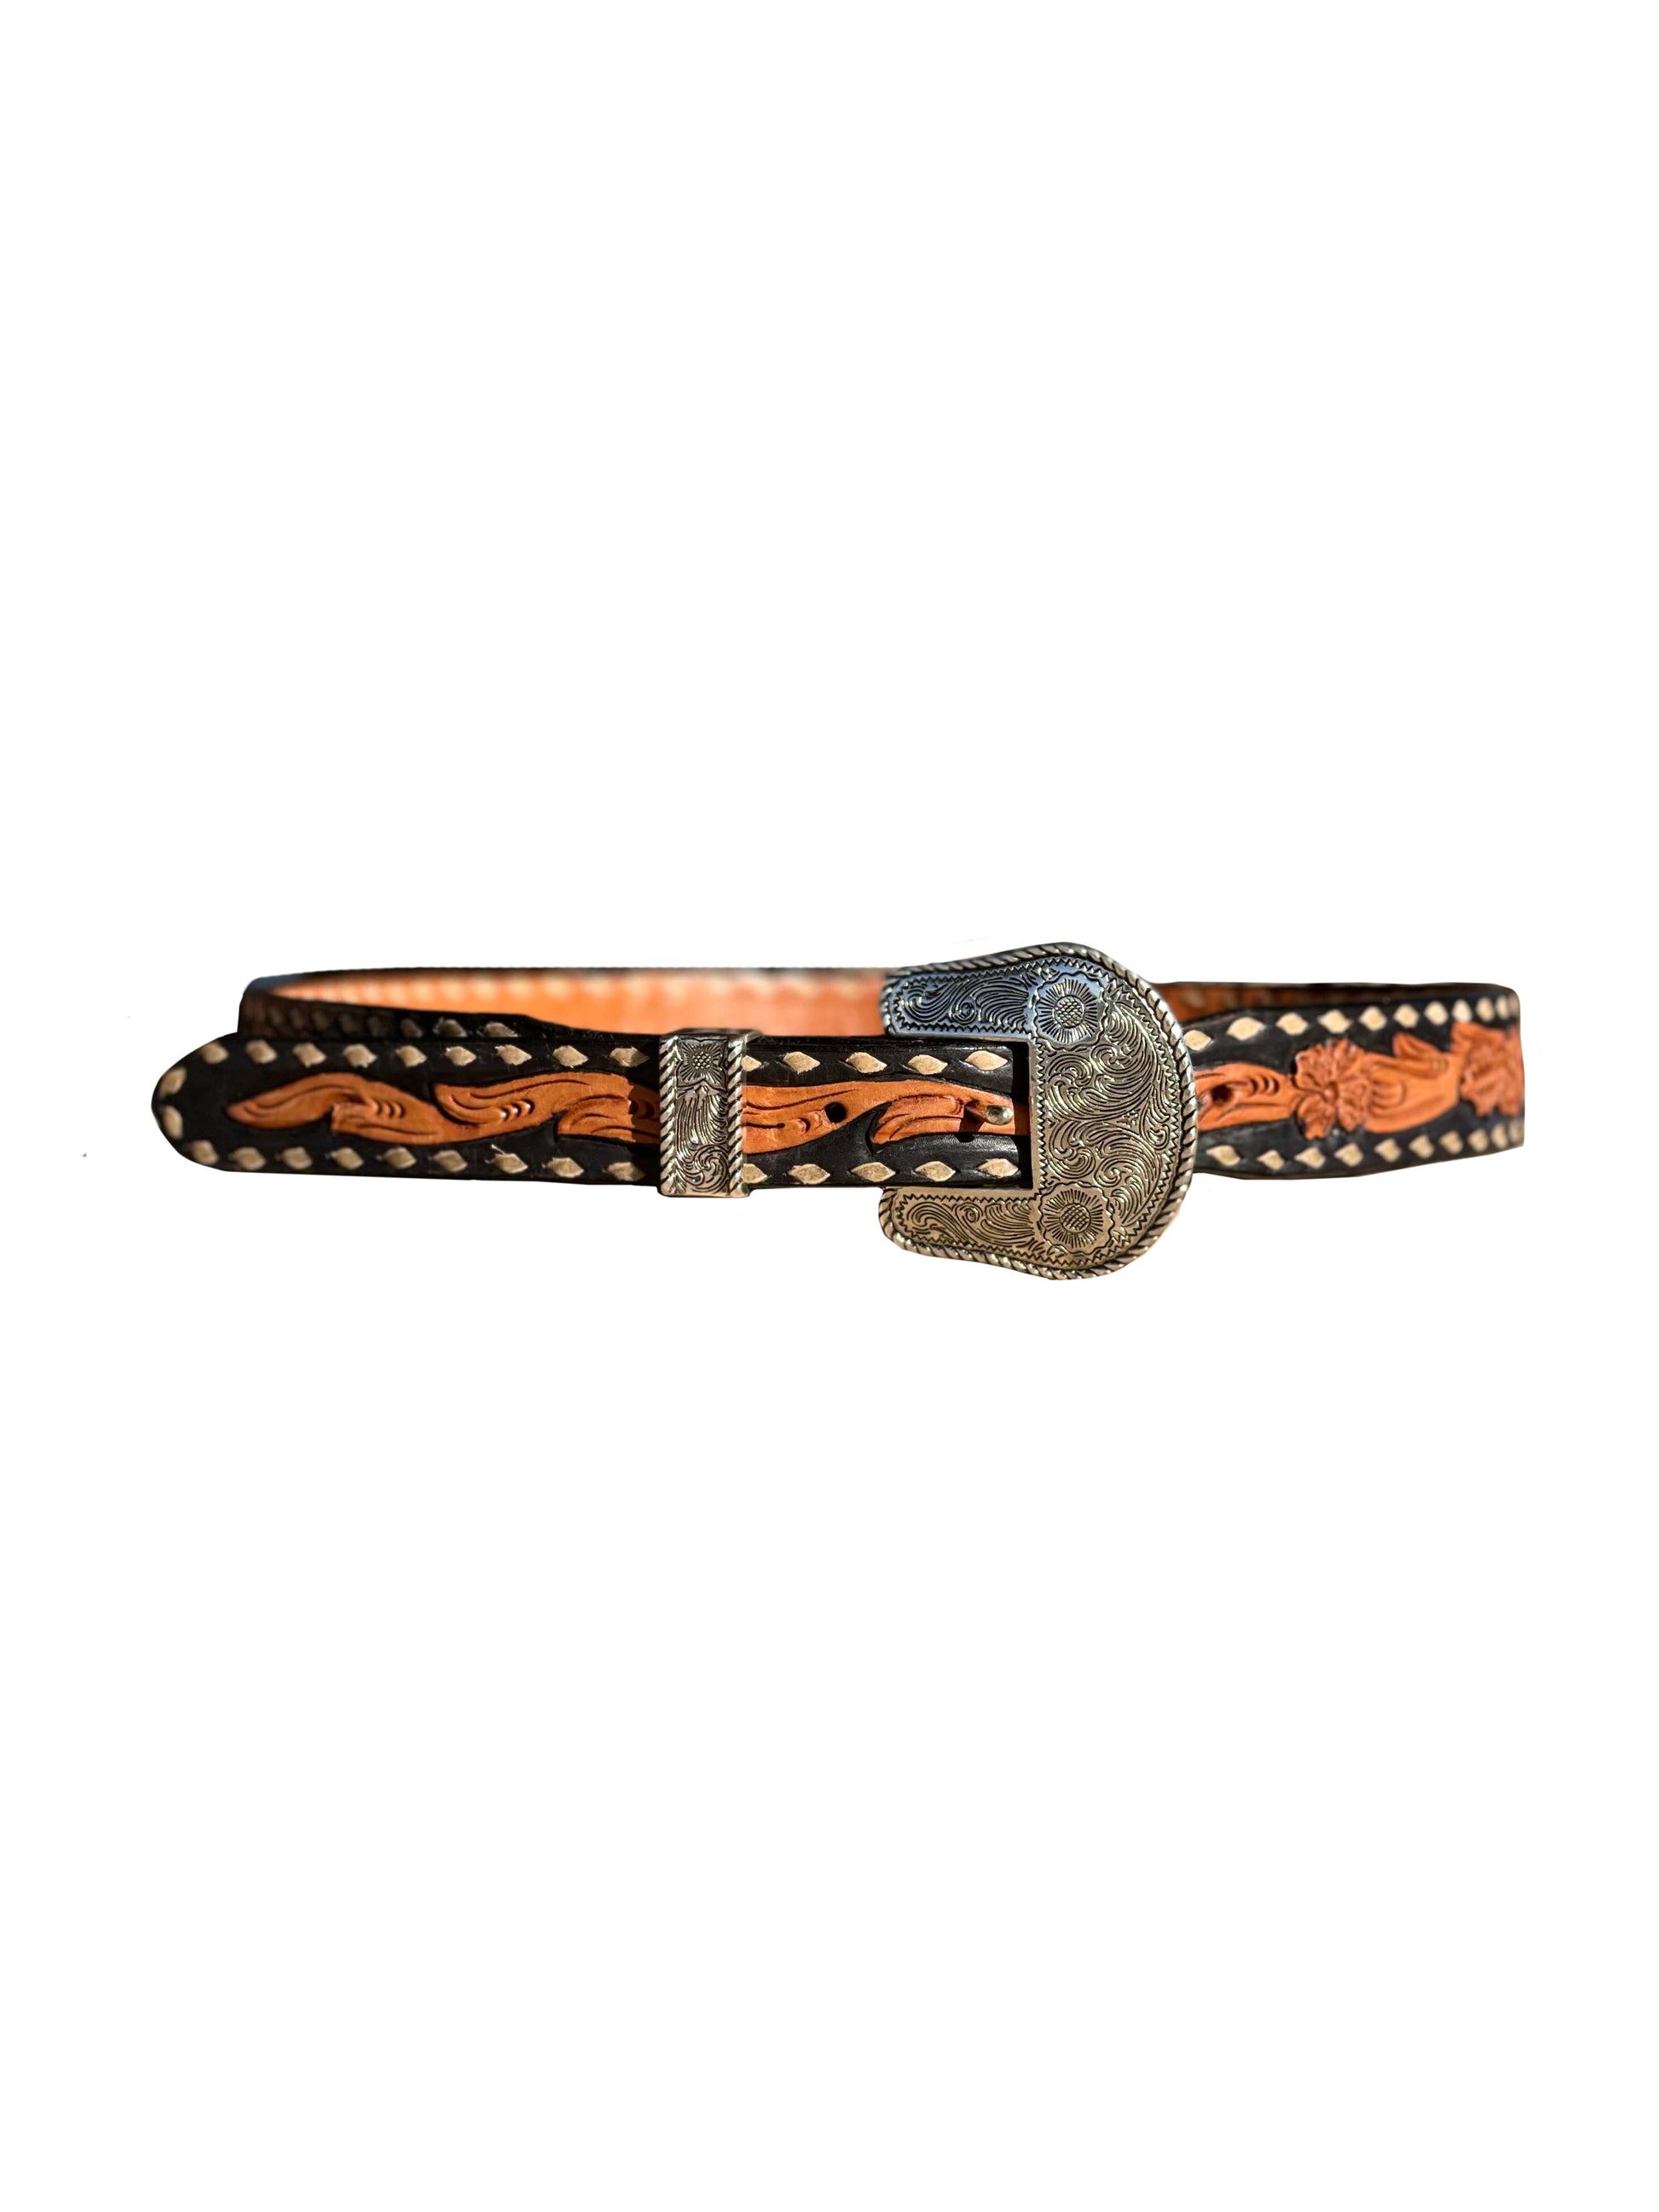 This is our women's TAPERED golden leather belt with black paint to the edge and mini wild rose tooling. It has single buckstitching around the border.